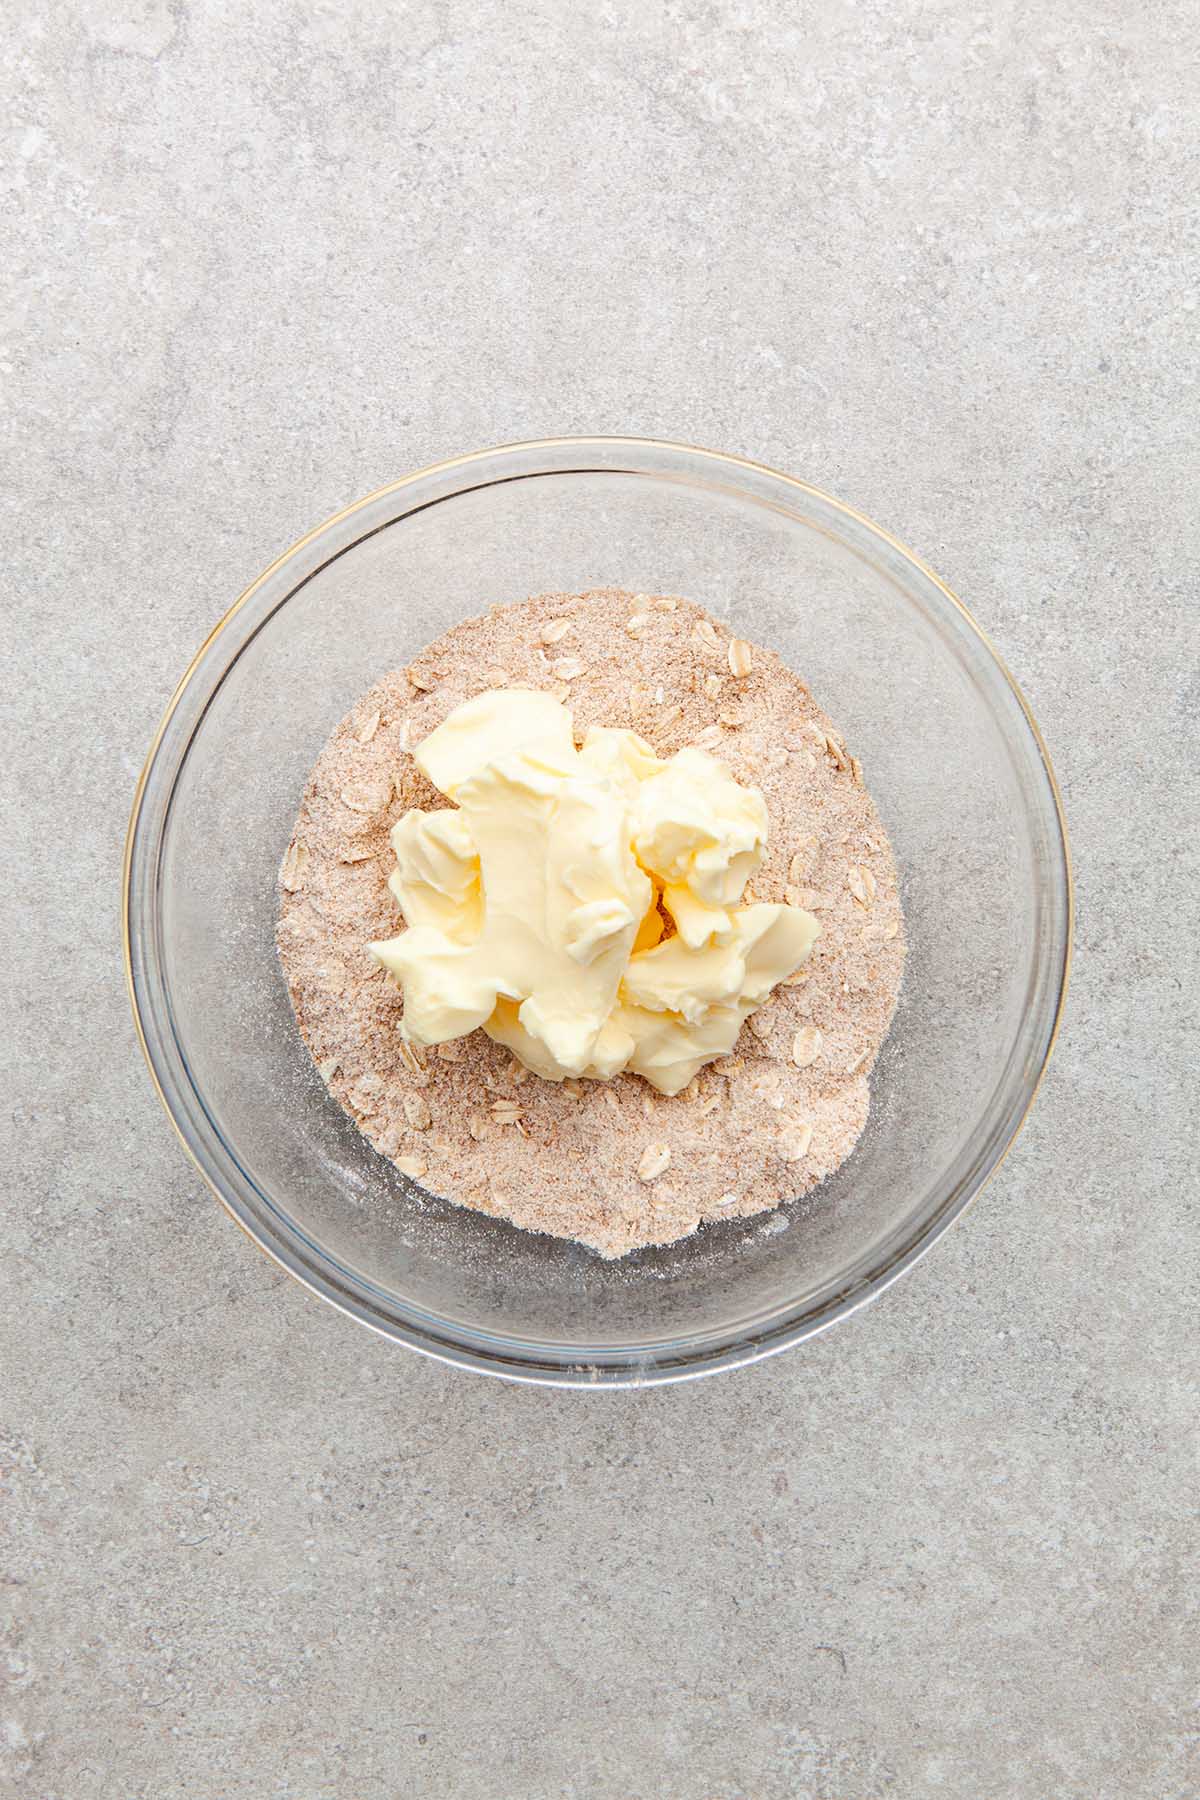 A bowl of flour and oats with a large chunk of butter sitting on top in a glass bowl.